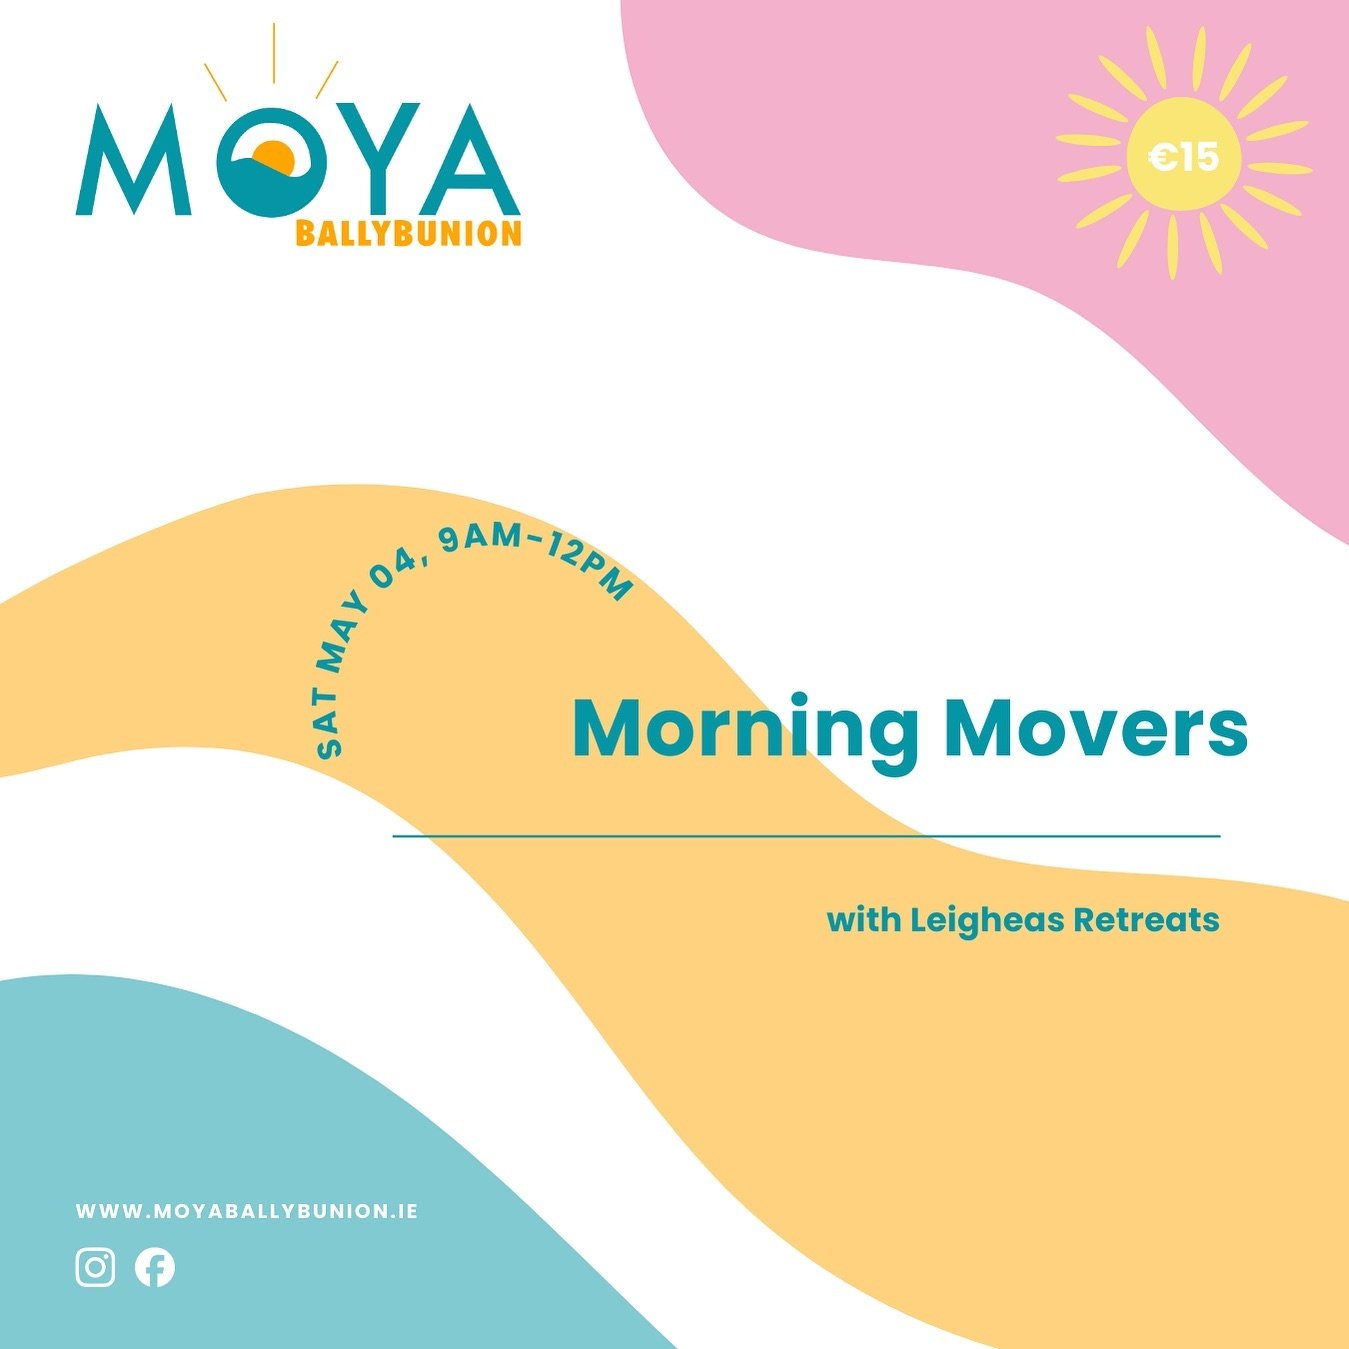 Morning Movers with Leigheas Retreats 💃🕺🏻
Saturday 4th May
09:00 - 12:00
Cliff House Hotel, Cliff Road, Ballybunion.
Rise &amp; Rock Out&rsquo; Dance event created by Cathy Healy &amp; Katie O&rsquo;Brien.
Music and movement to activate and boost 